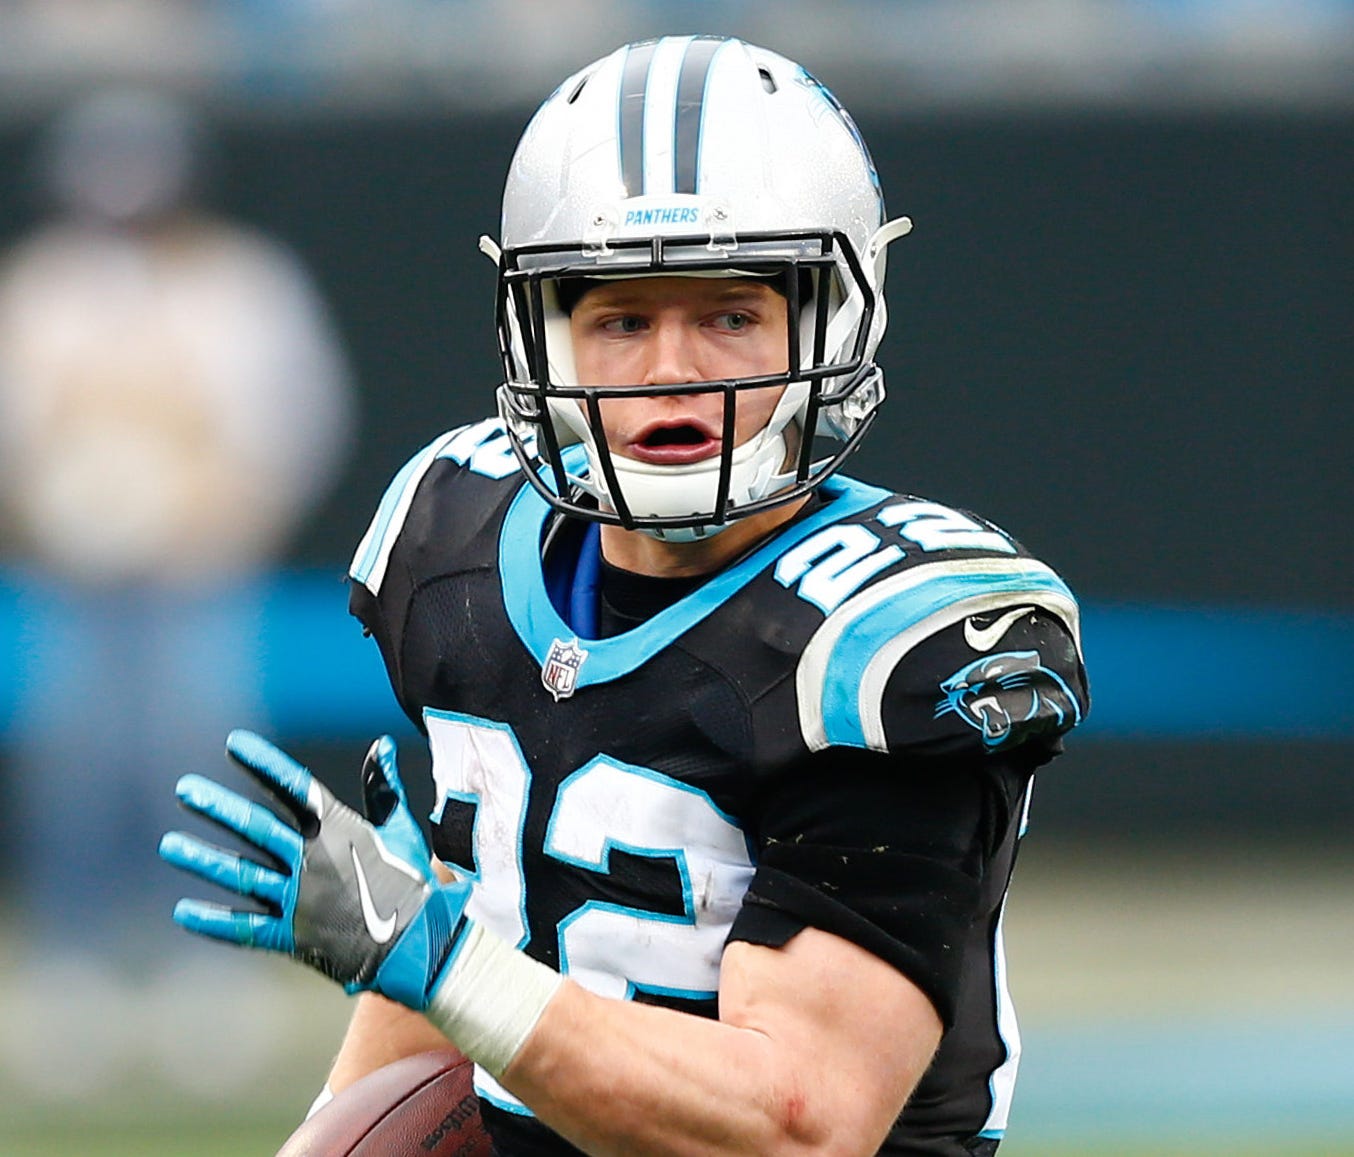 Panthers running back Christian McCaffrey helped save a hiker after a fall at Castle Rock, Colo.